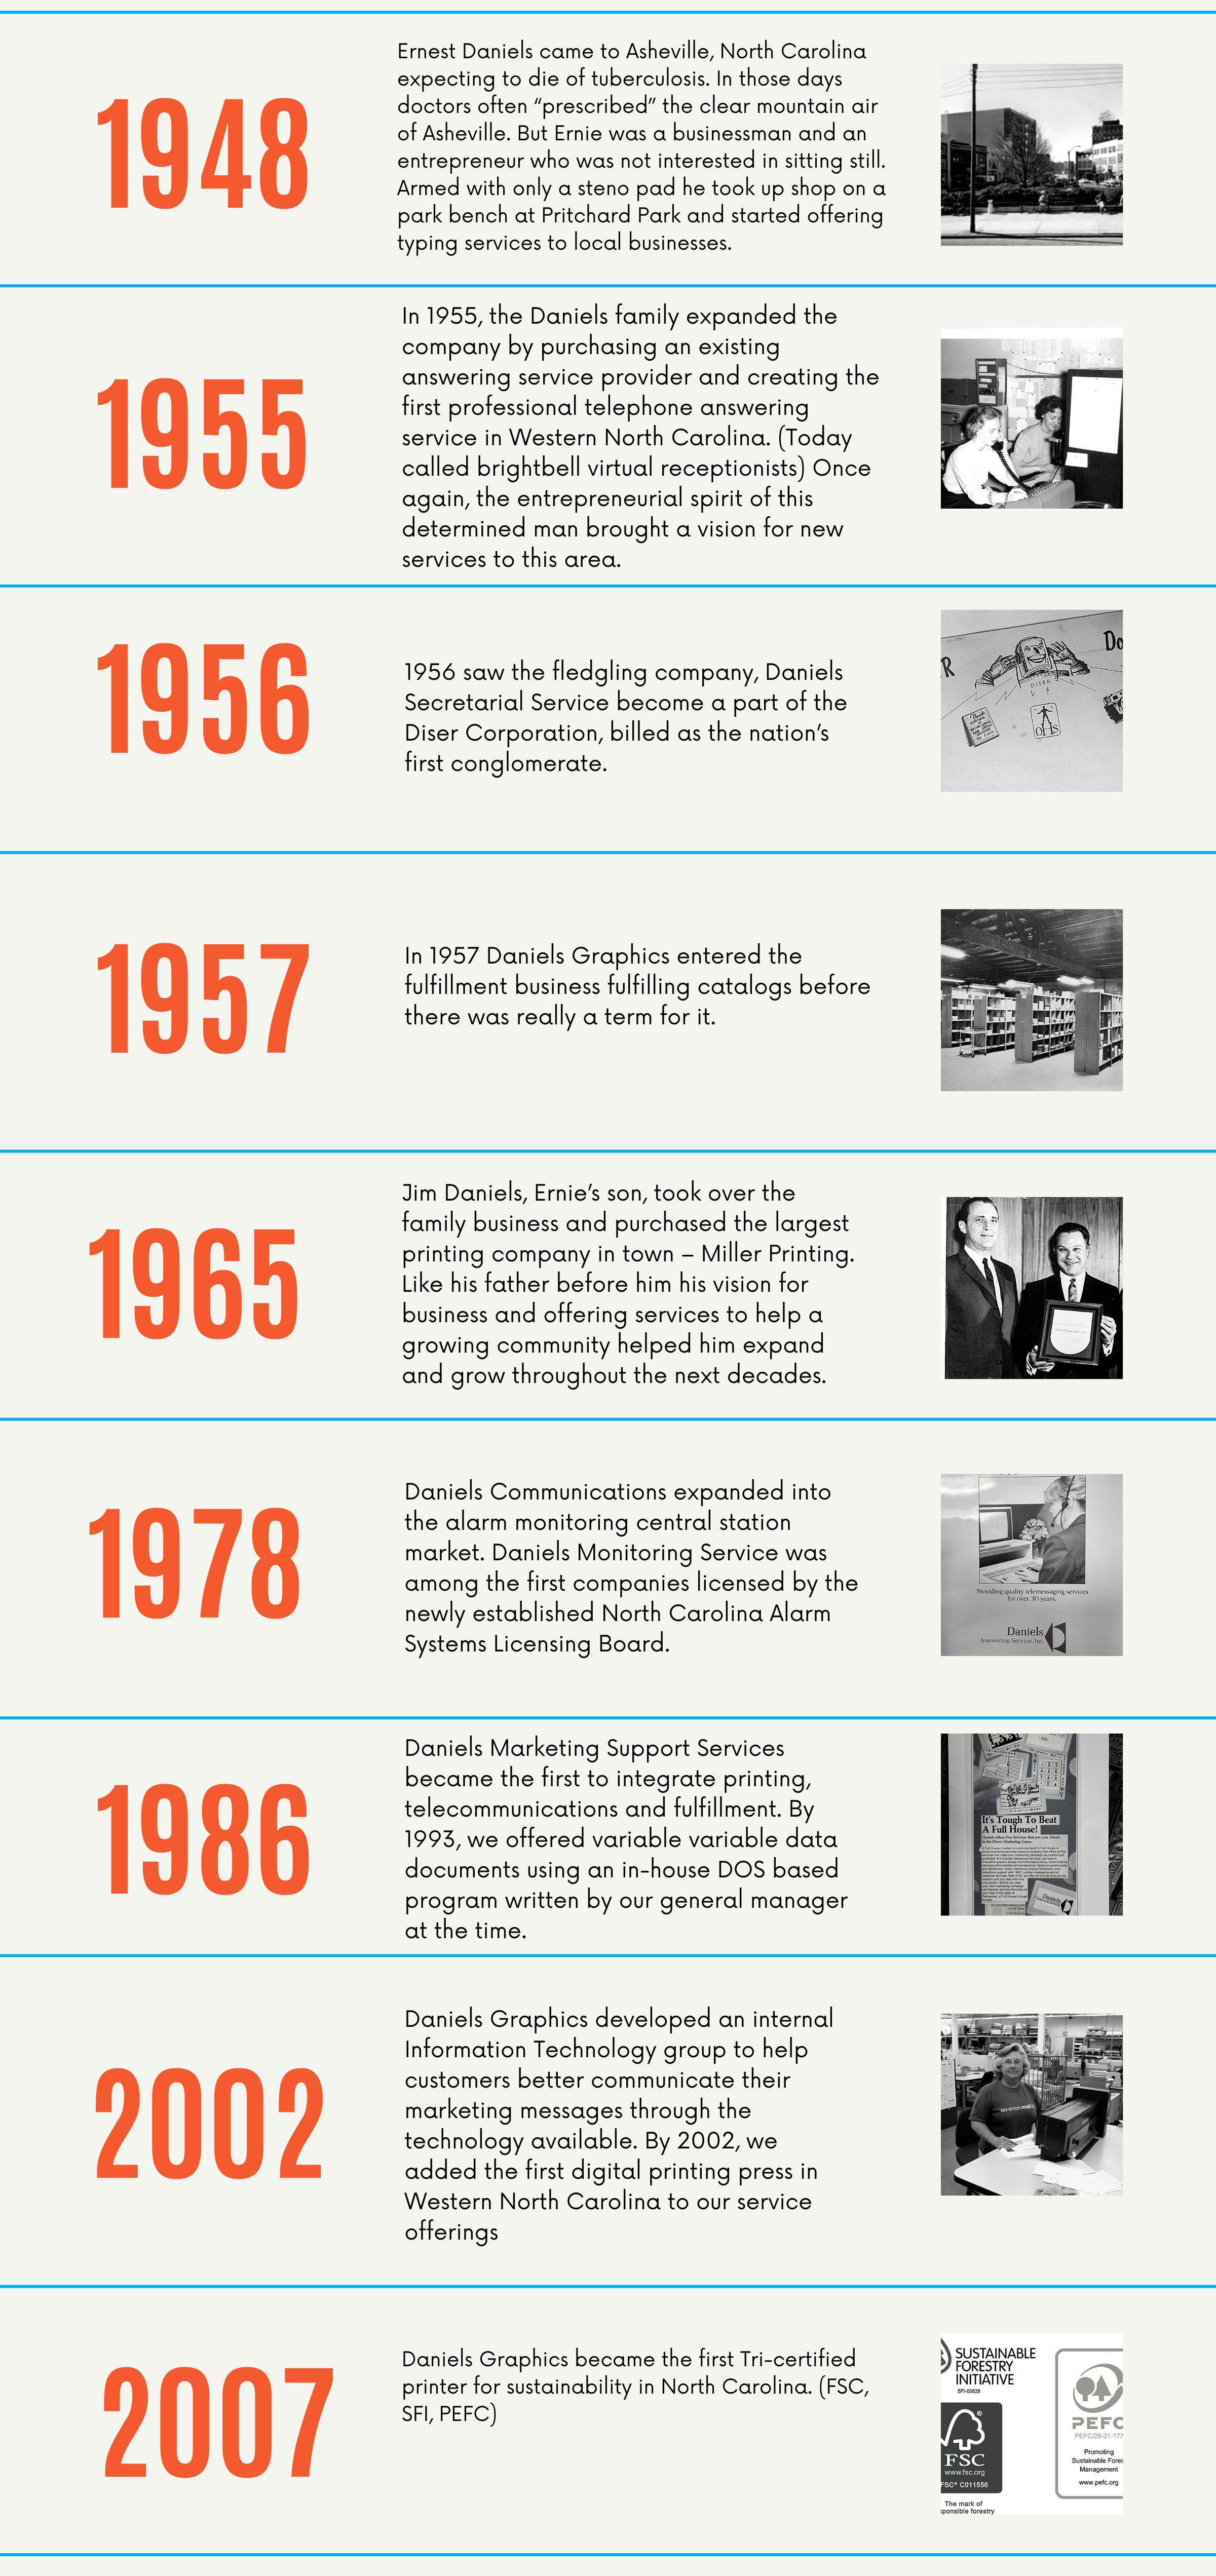 Ernest Co-Warehousing Coworking Space in Asheville - formerly The Daniels Group history timeline graphic